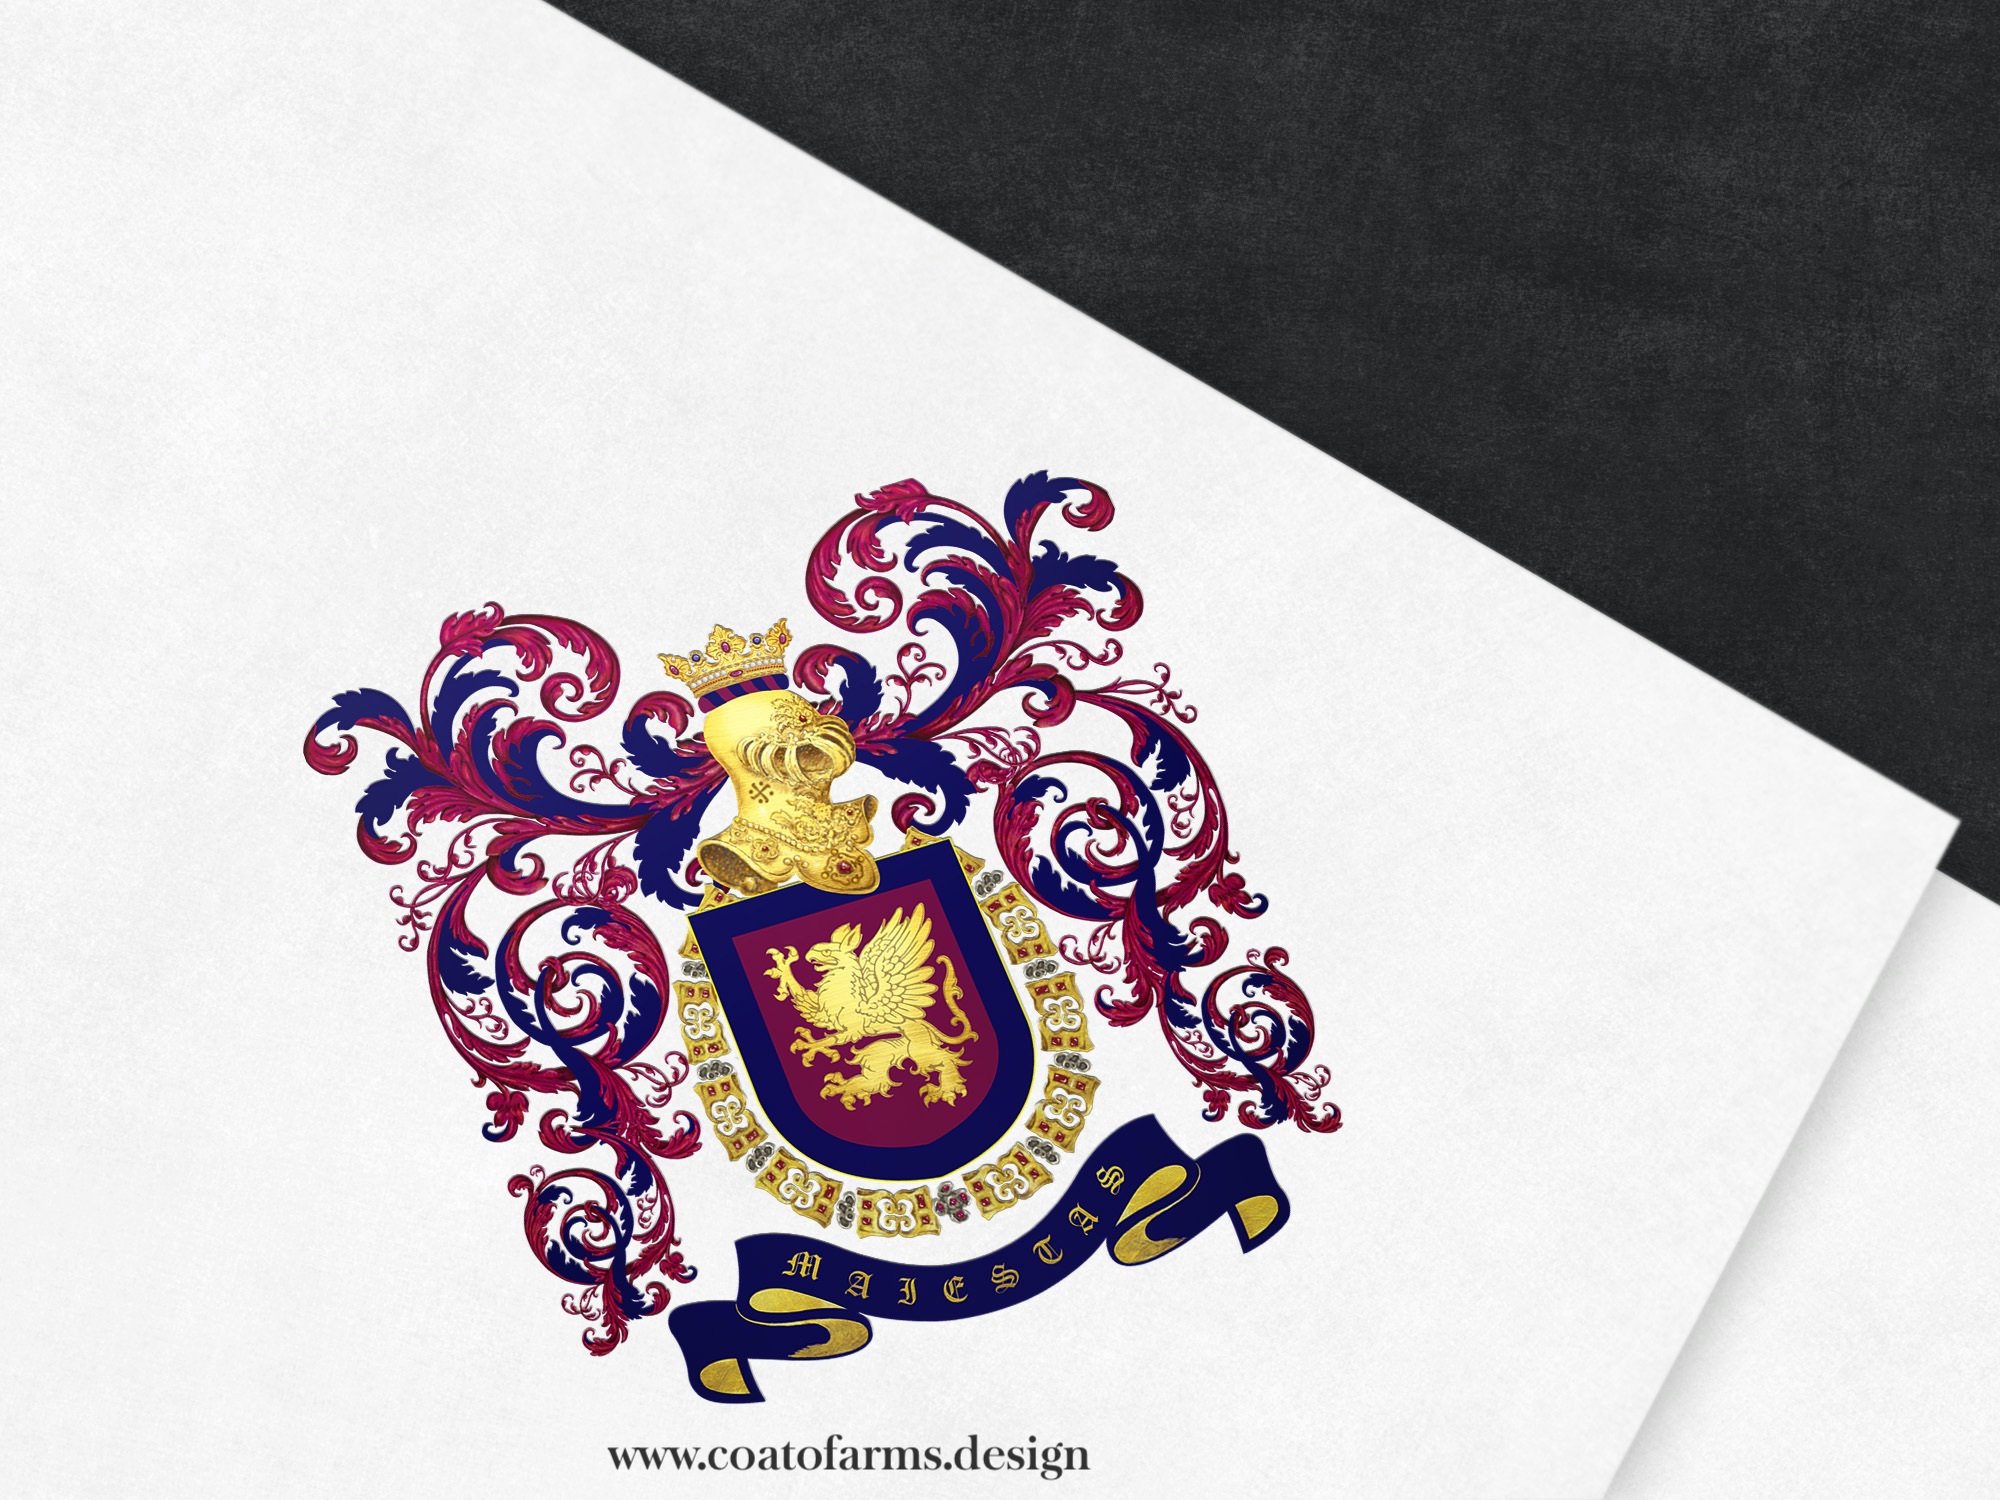 coat of arms family crest i designed for a lawyer from Macedonia